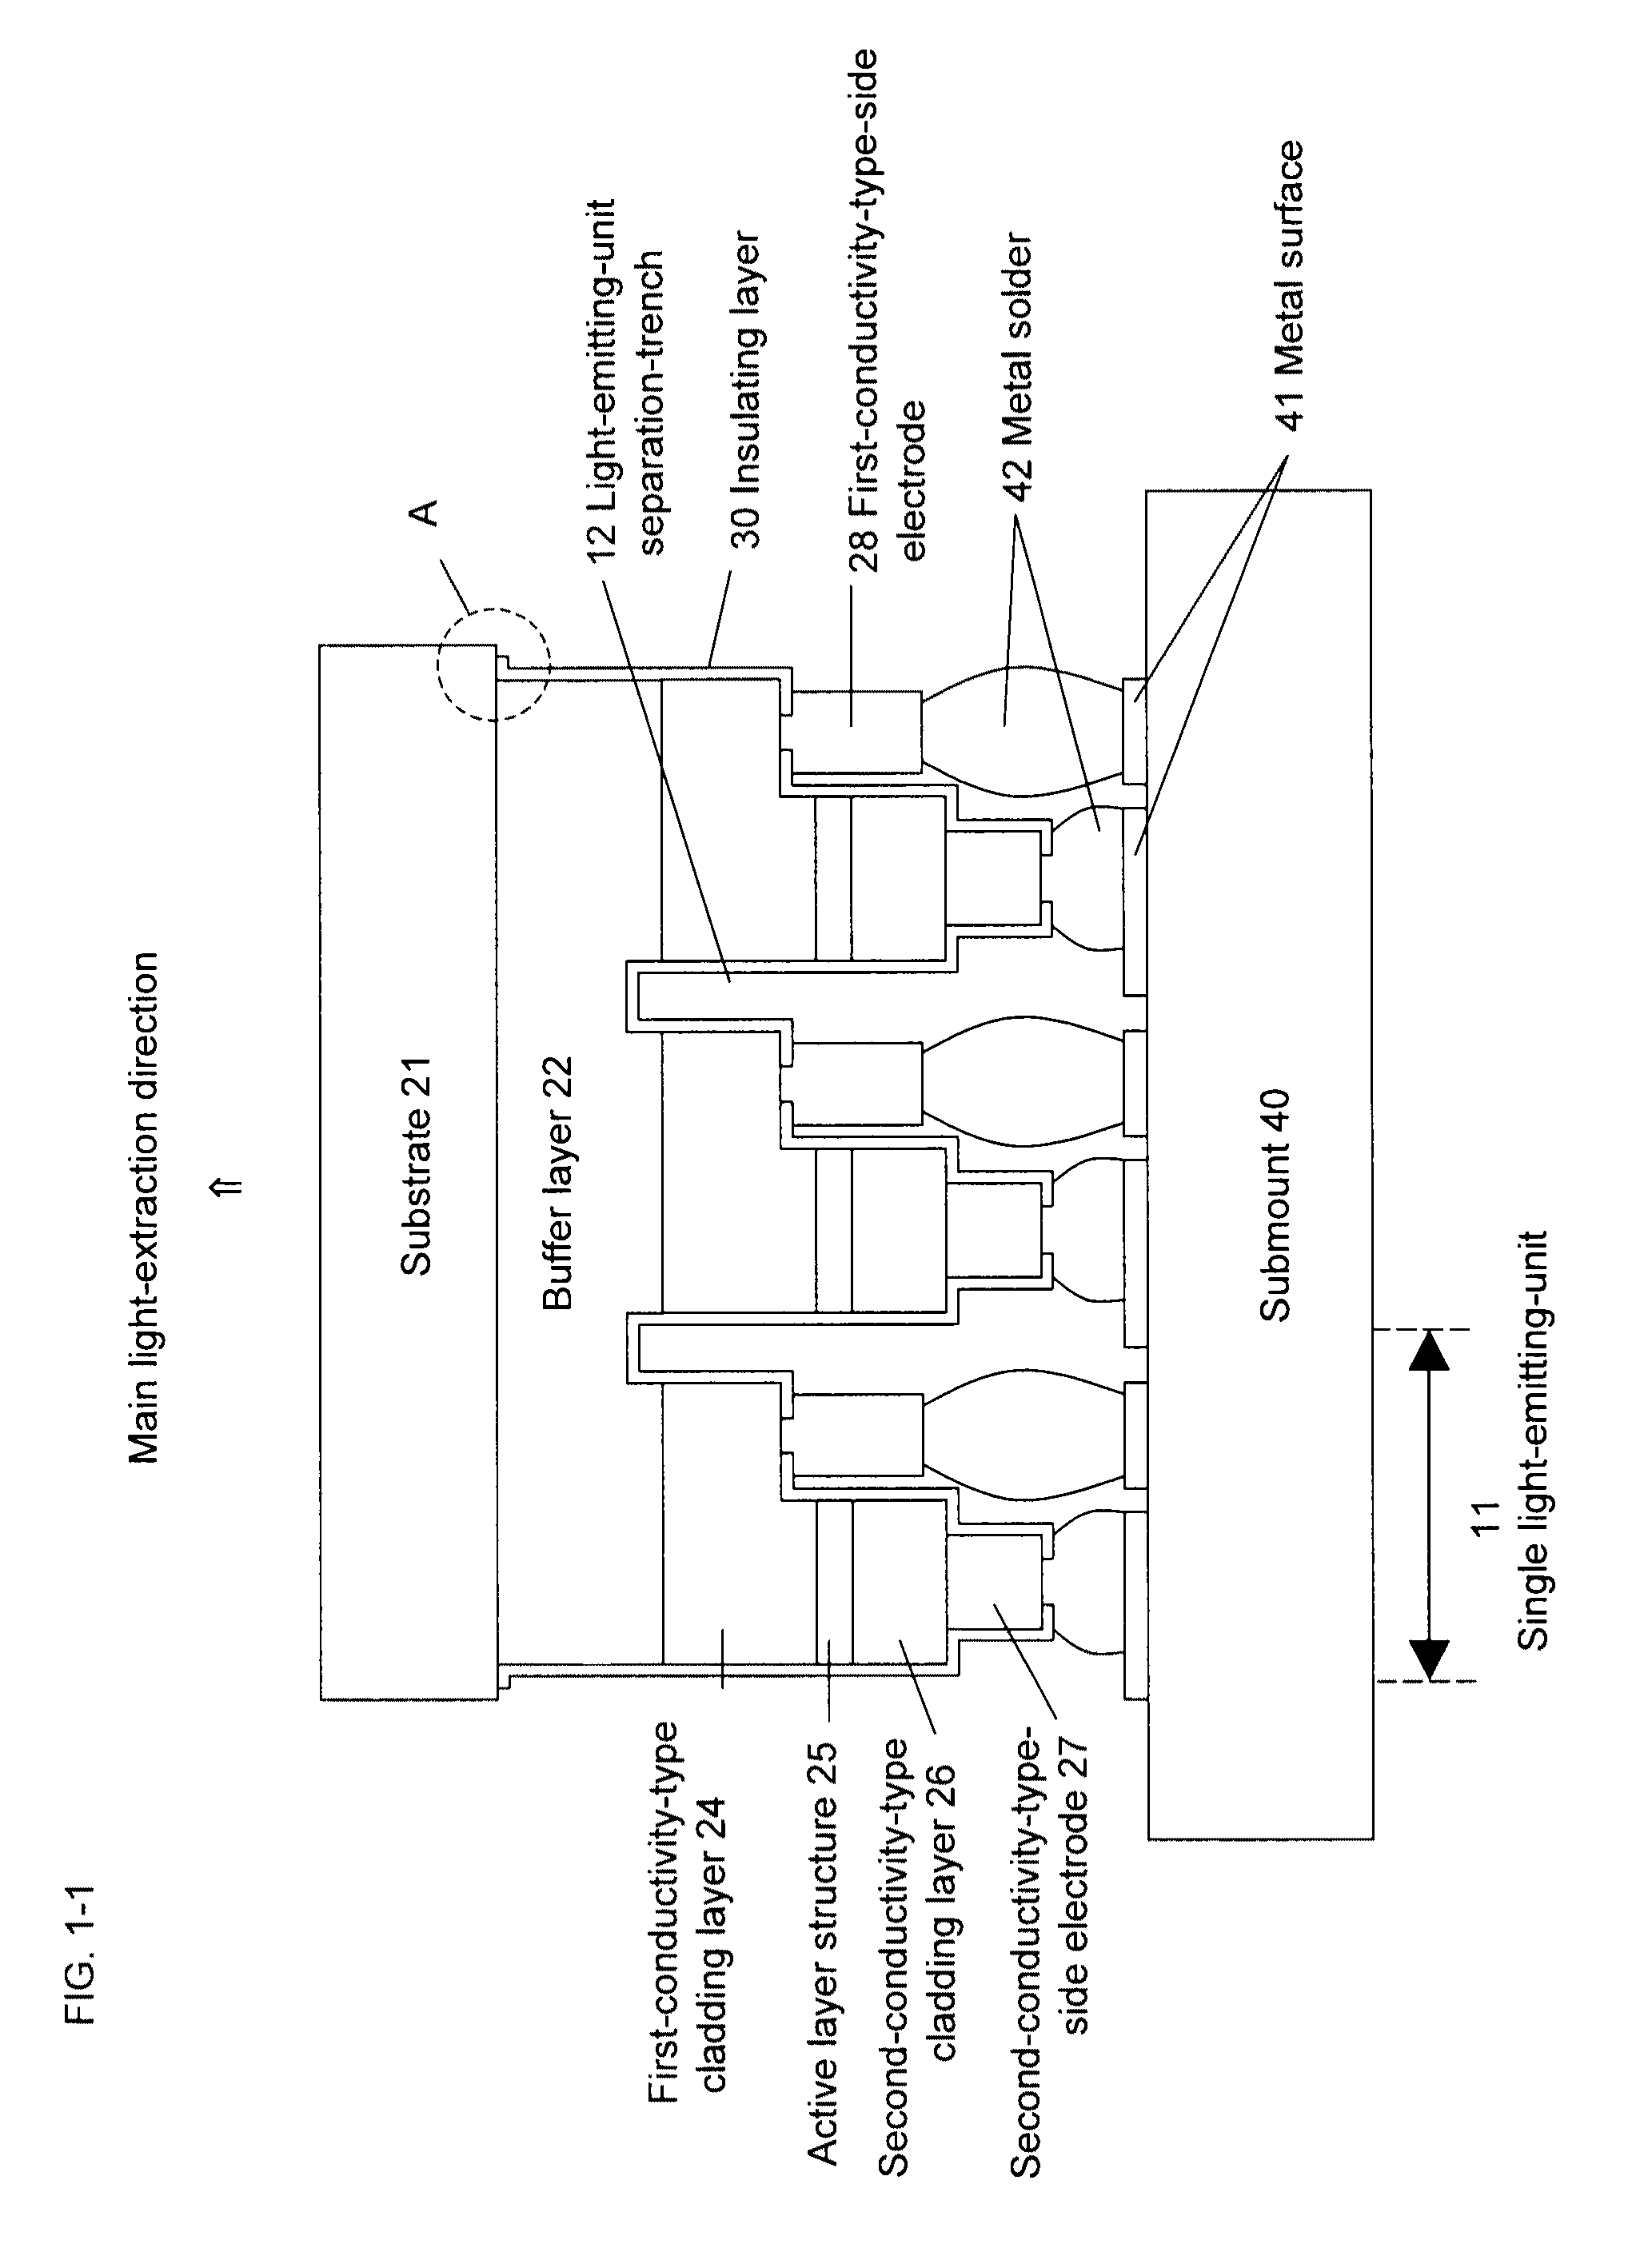 Integrated semiconductor light emitting device and method for manufacturing same